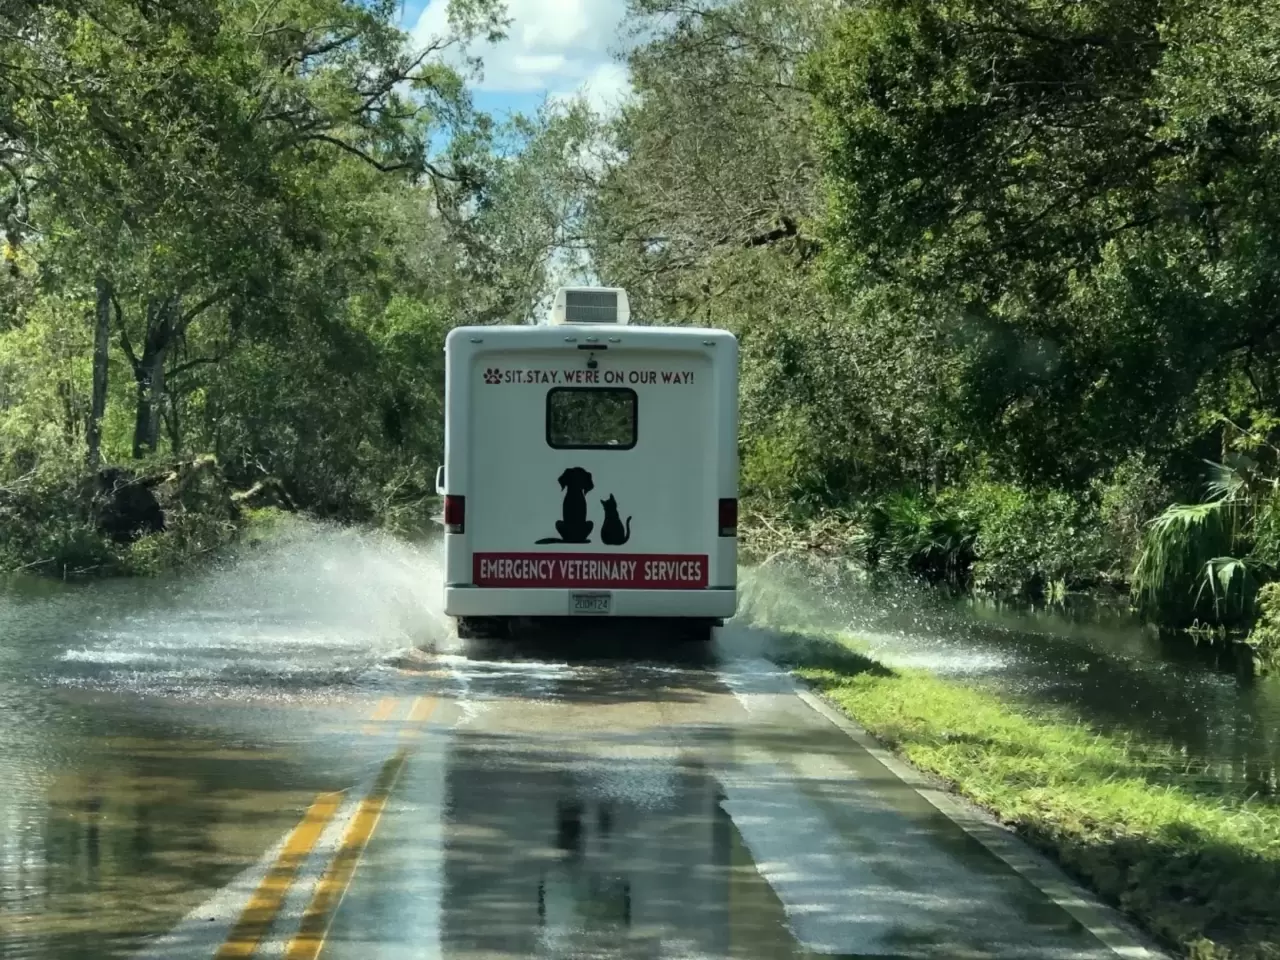 CareVet deploys CareVet Rescue, a volunteer-based disaster relief mobile veterinary unit to aid in Hurricane Ian relief efforts